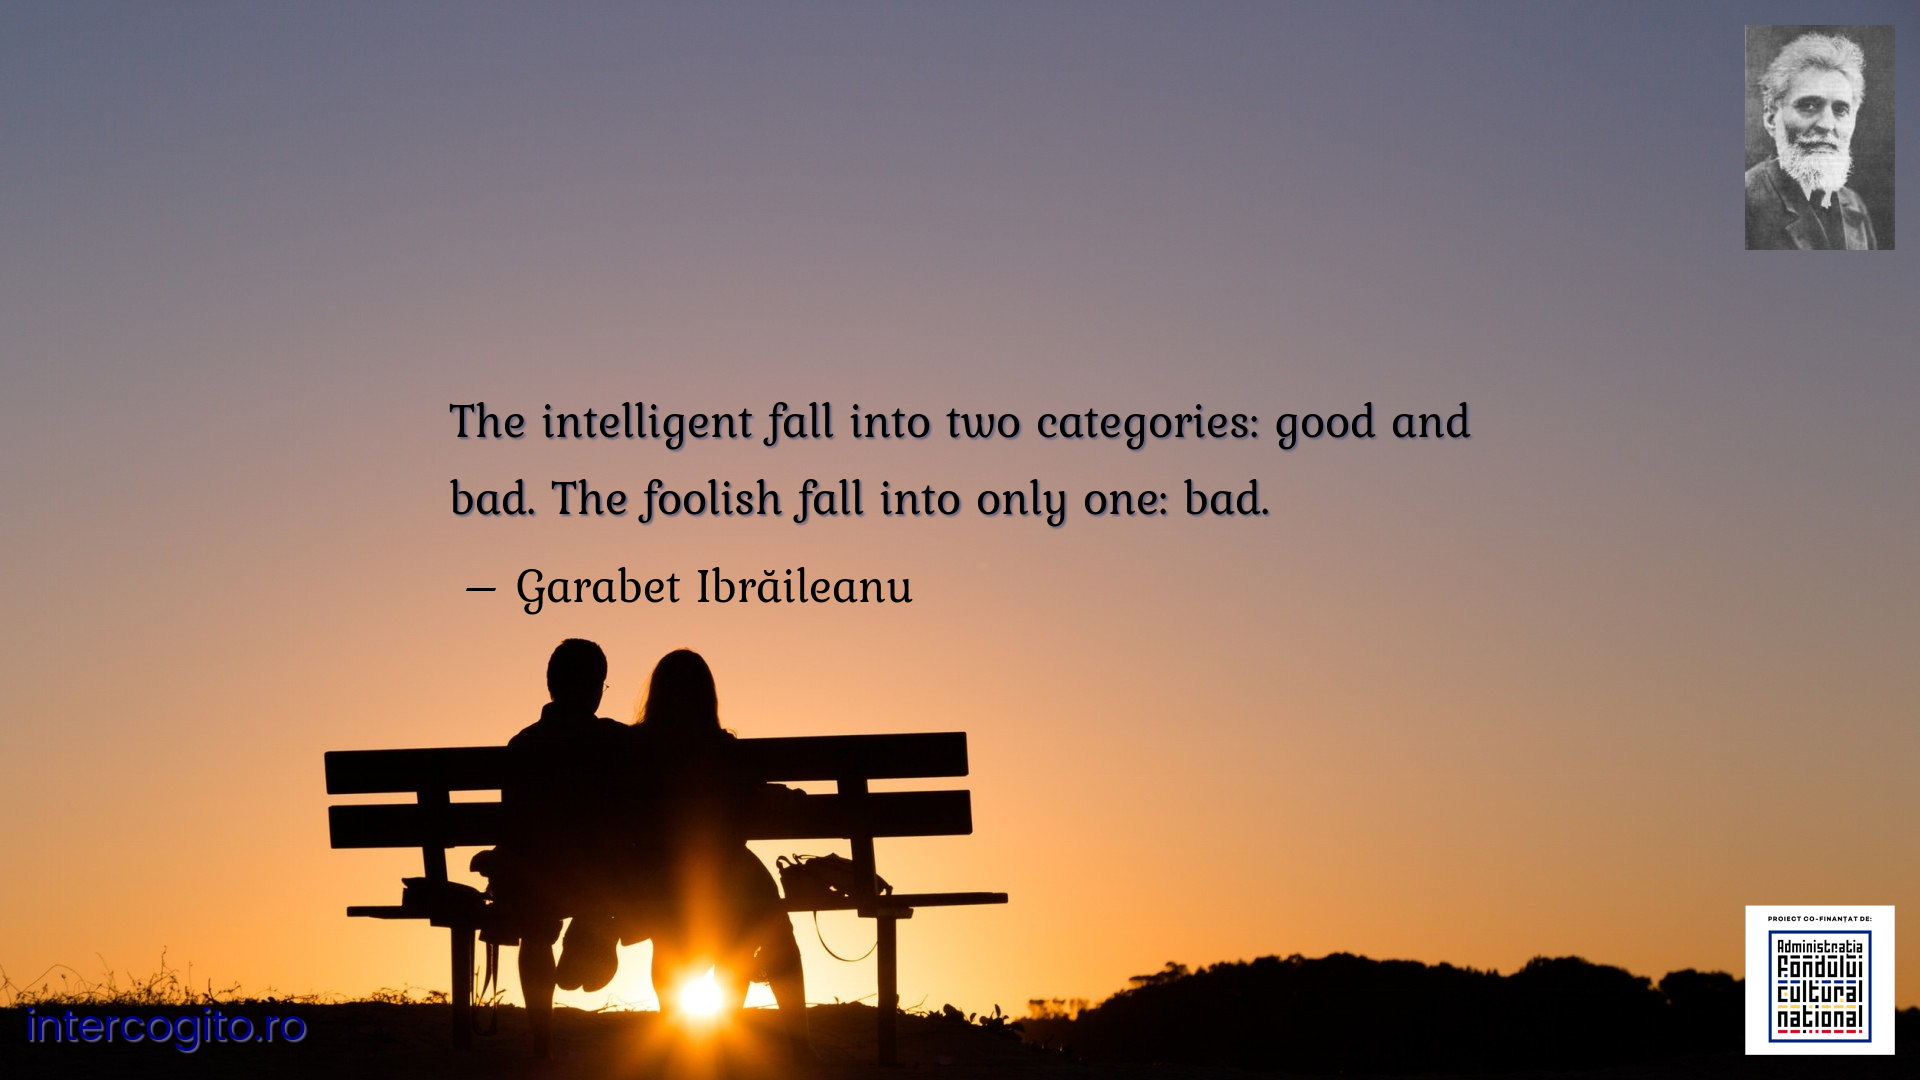 The intelligent fall into two categories: good and bad. The foolish fall into only one: bad.